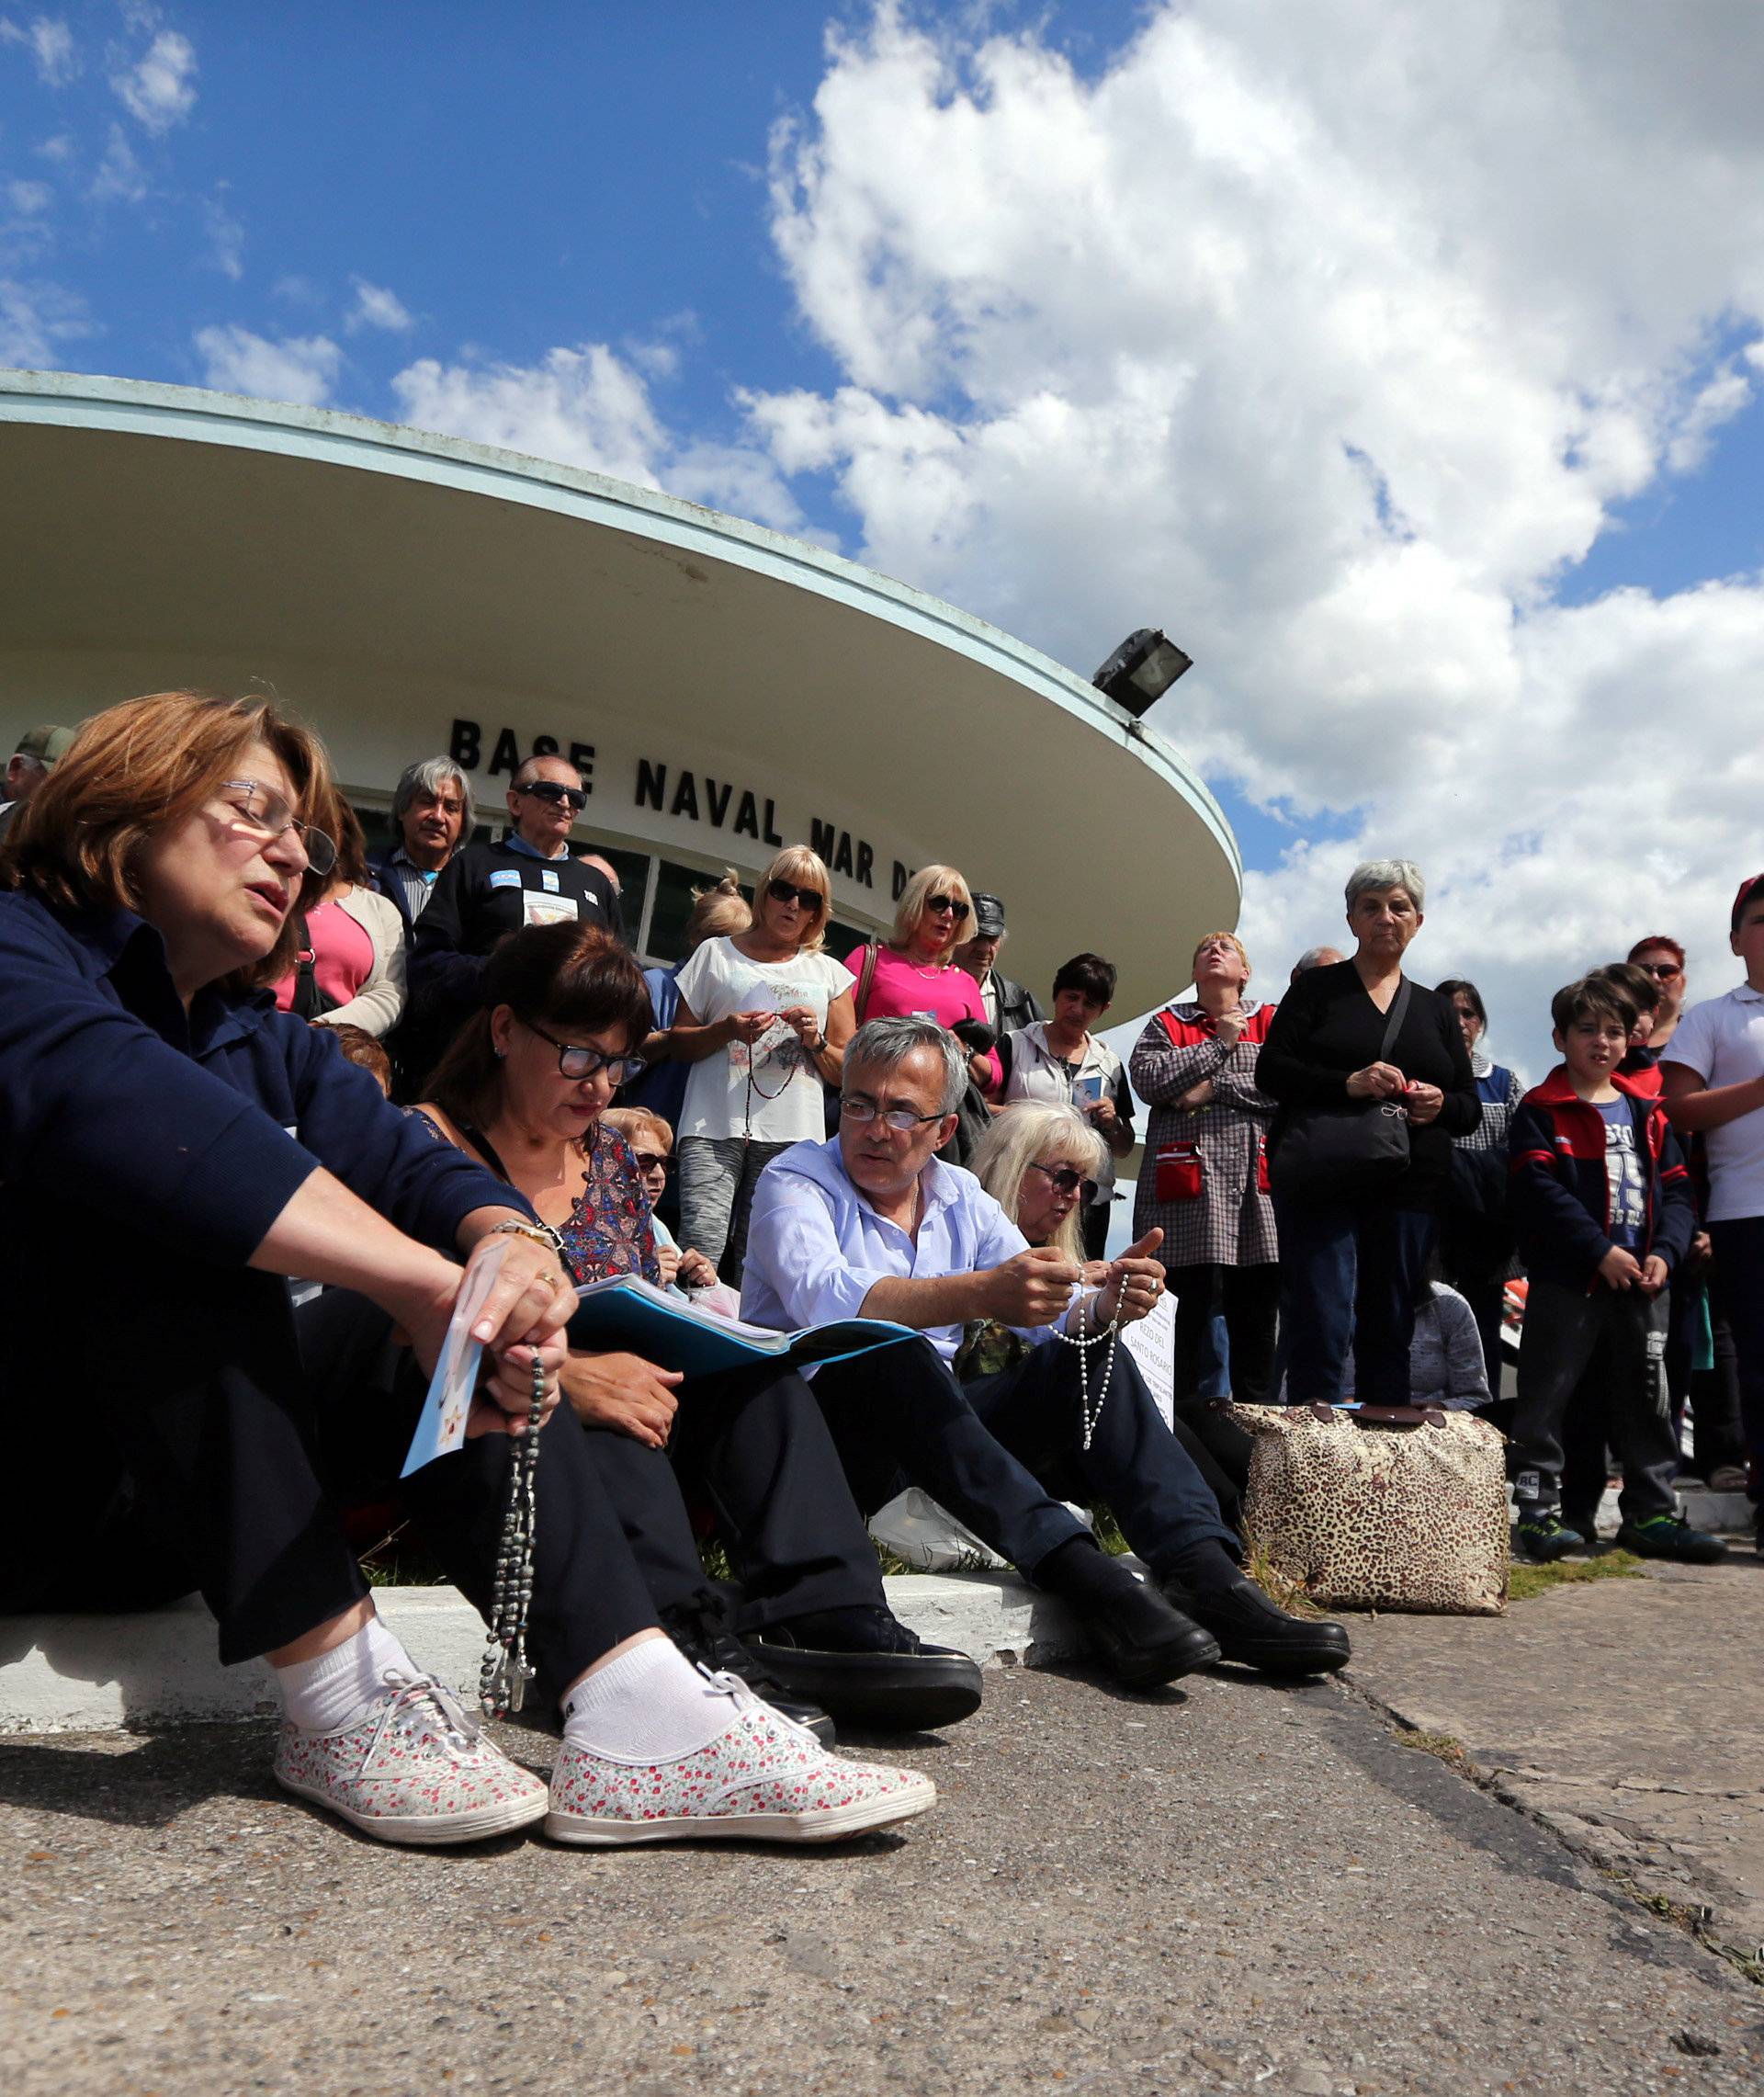 People gather to pray for the 44 crew members of the missing at sea ARA San Juan submarine, at the entrance of an Argentine Naval Base in Mar del Plata